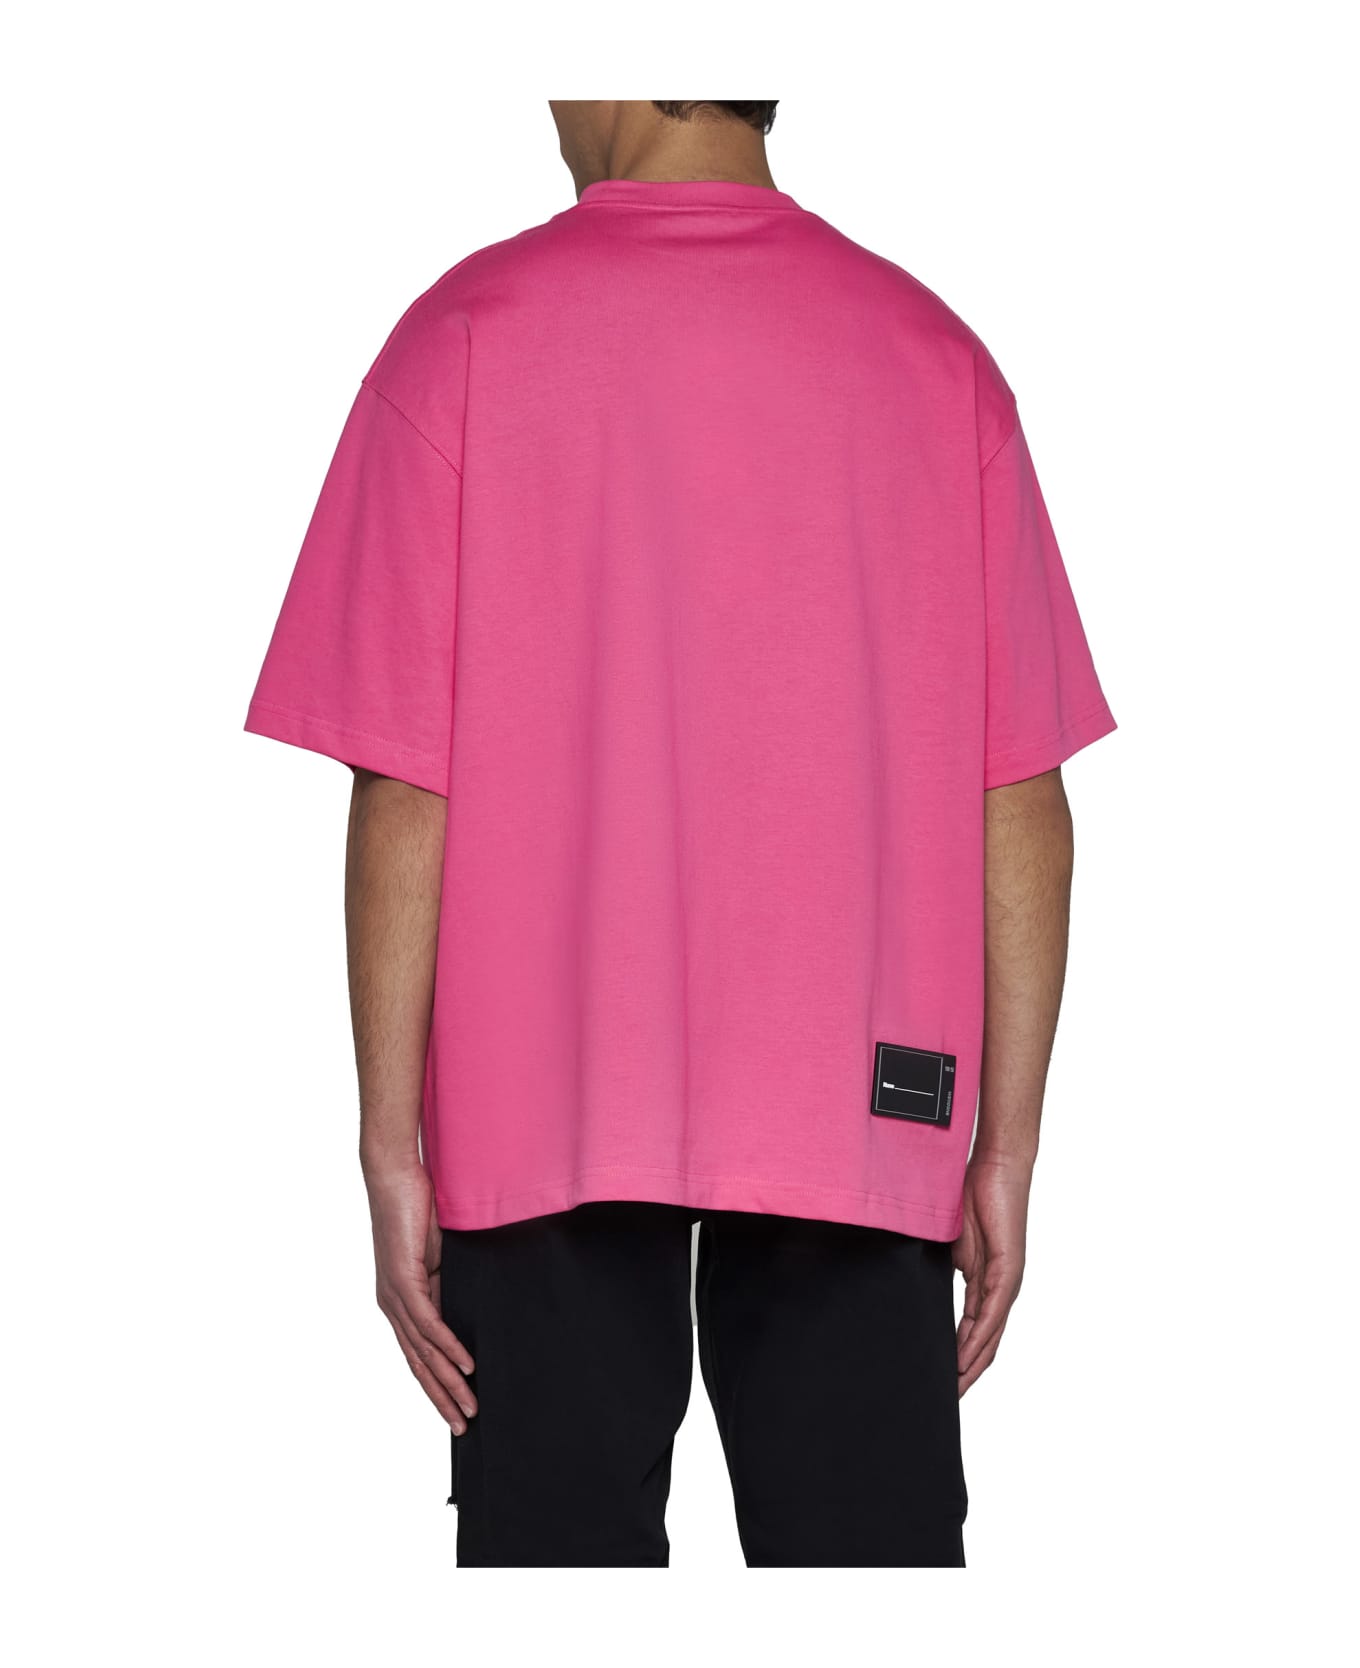 WE11 DONE T-Shirt - Pink